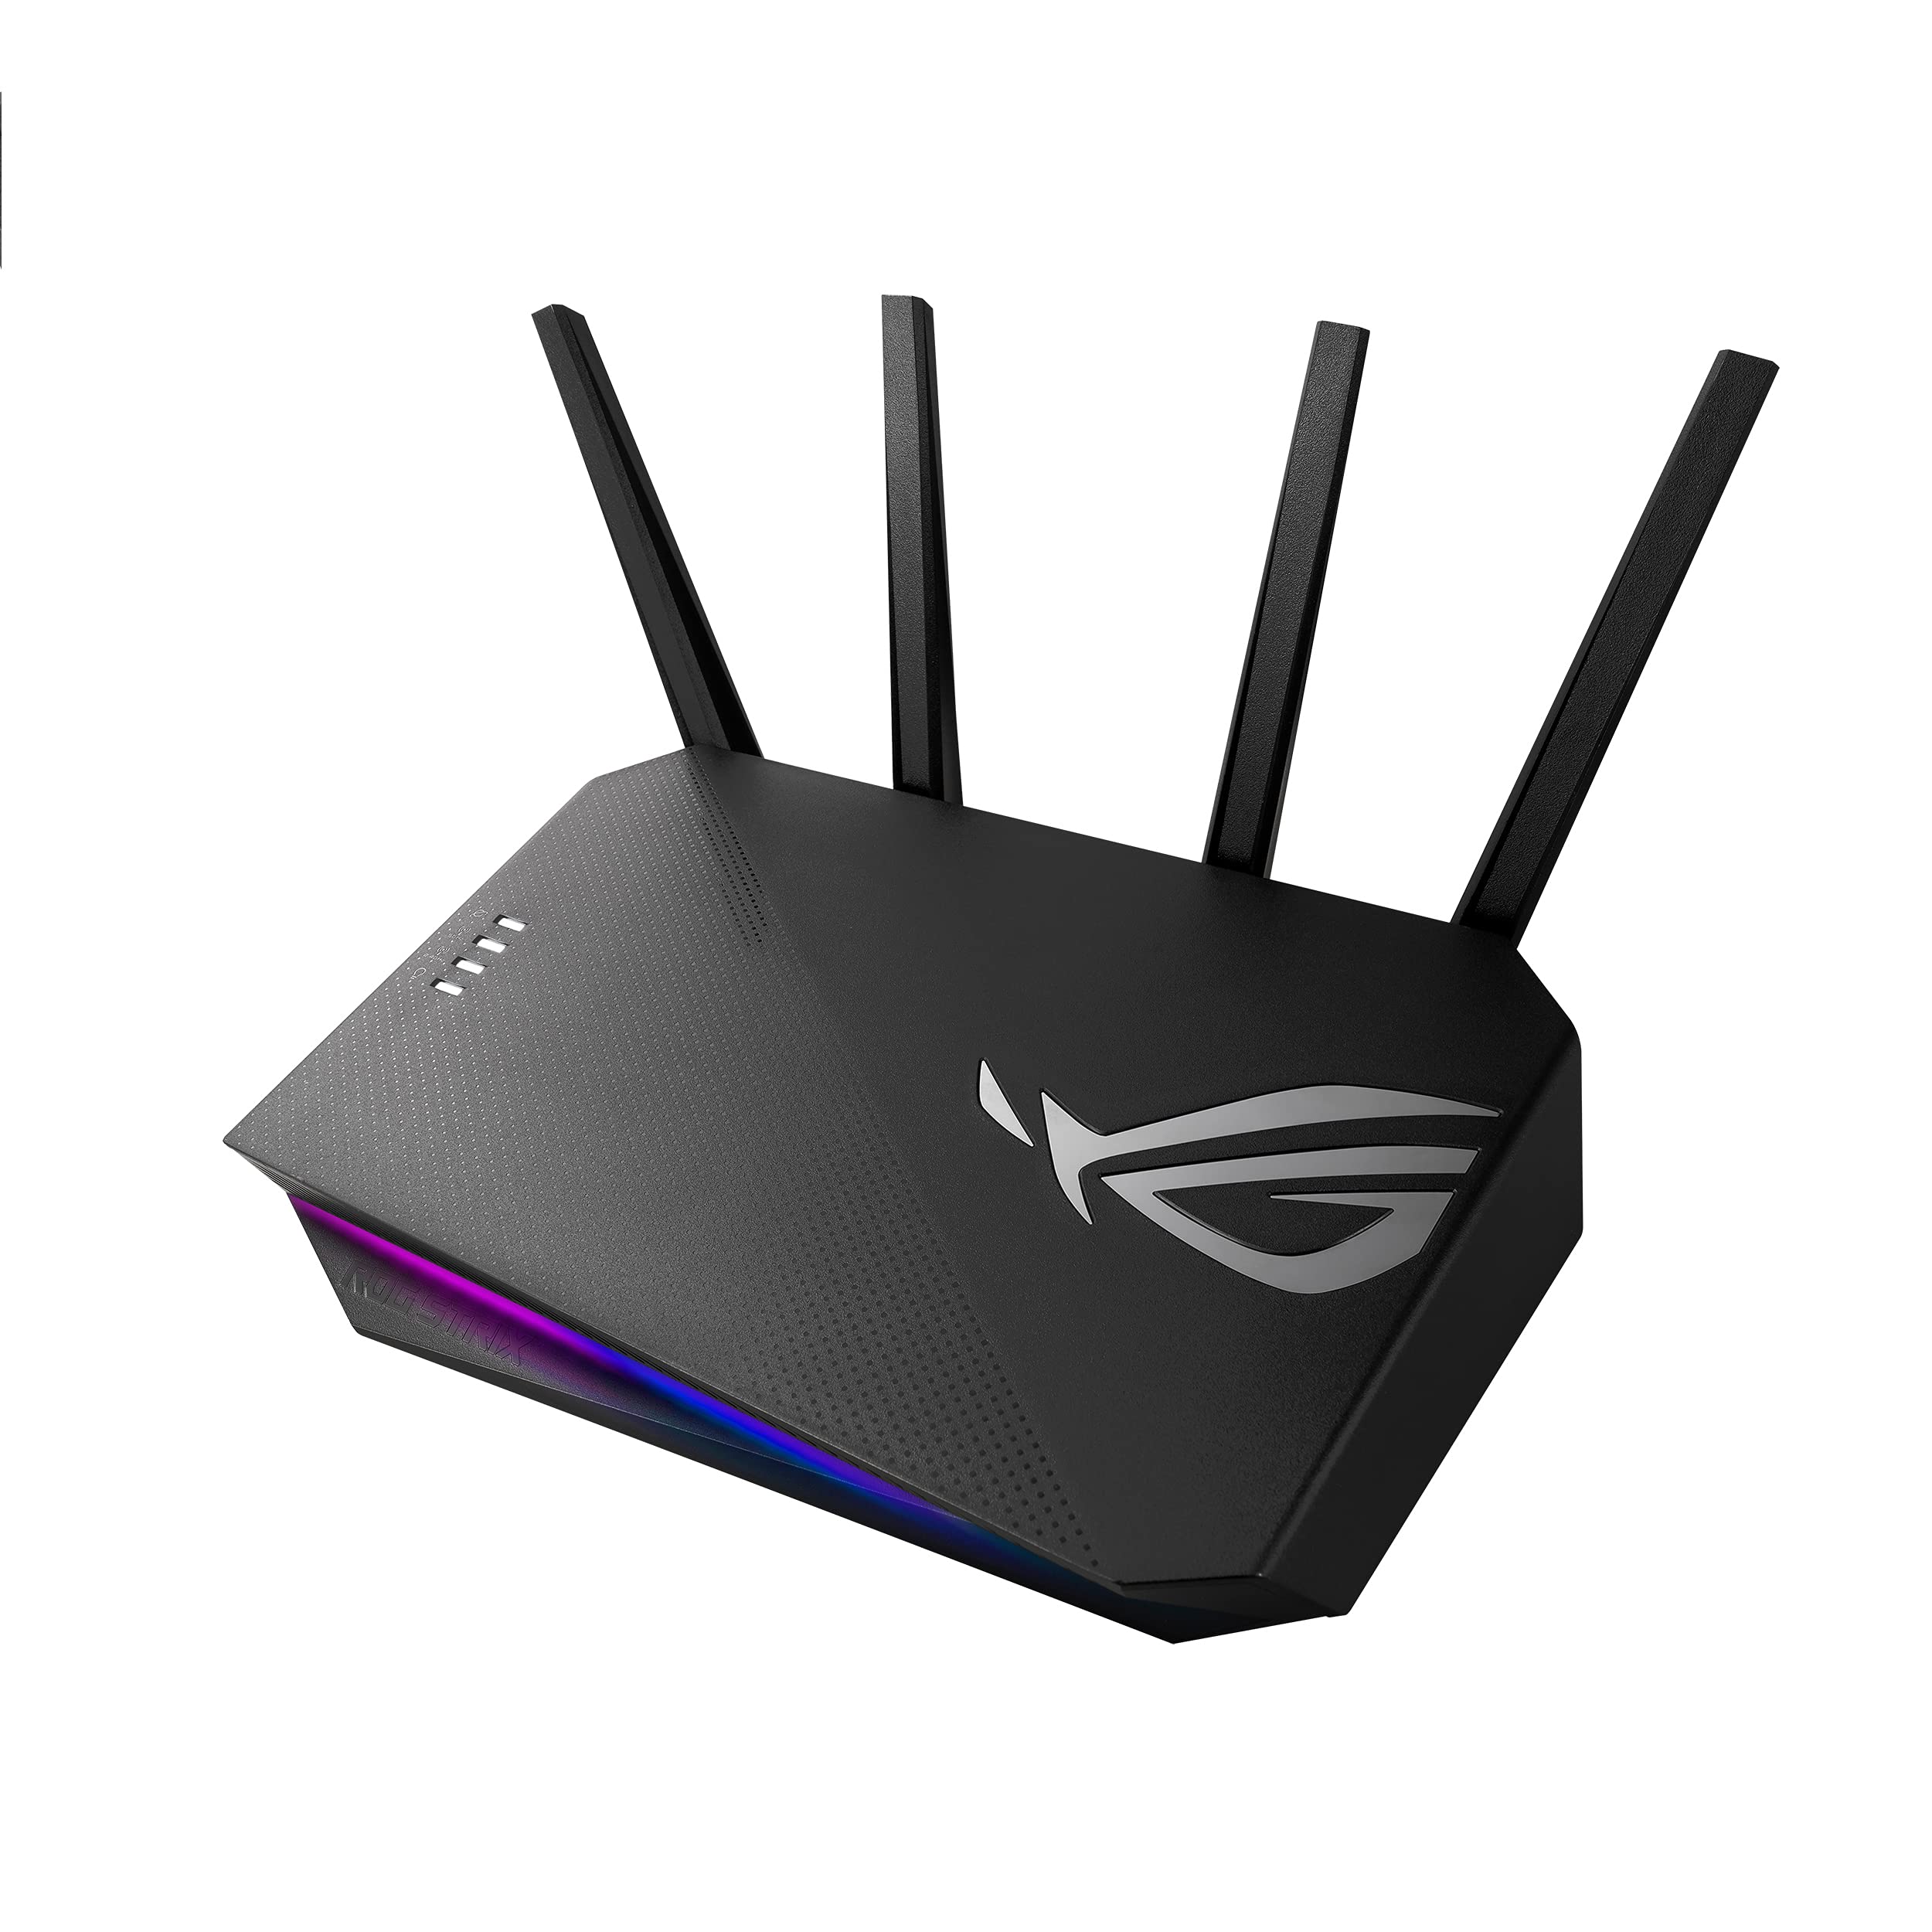 ASUS ROG Strix GS-AX3000 WiFi 6 Extendable Gaming Router, Gaming Port, Mobile Game Mode, Port Forwarding, VPN Fusion, Aura RGB, Subscription-free Network Security, Instant Guard, AiMesh Compatible